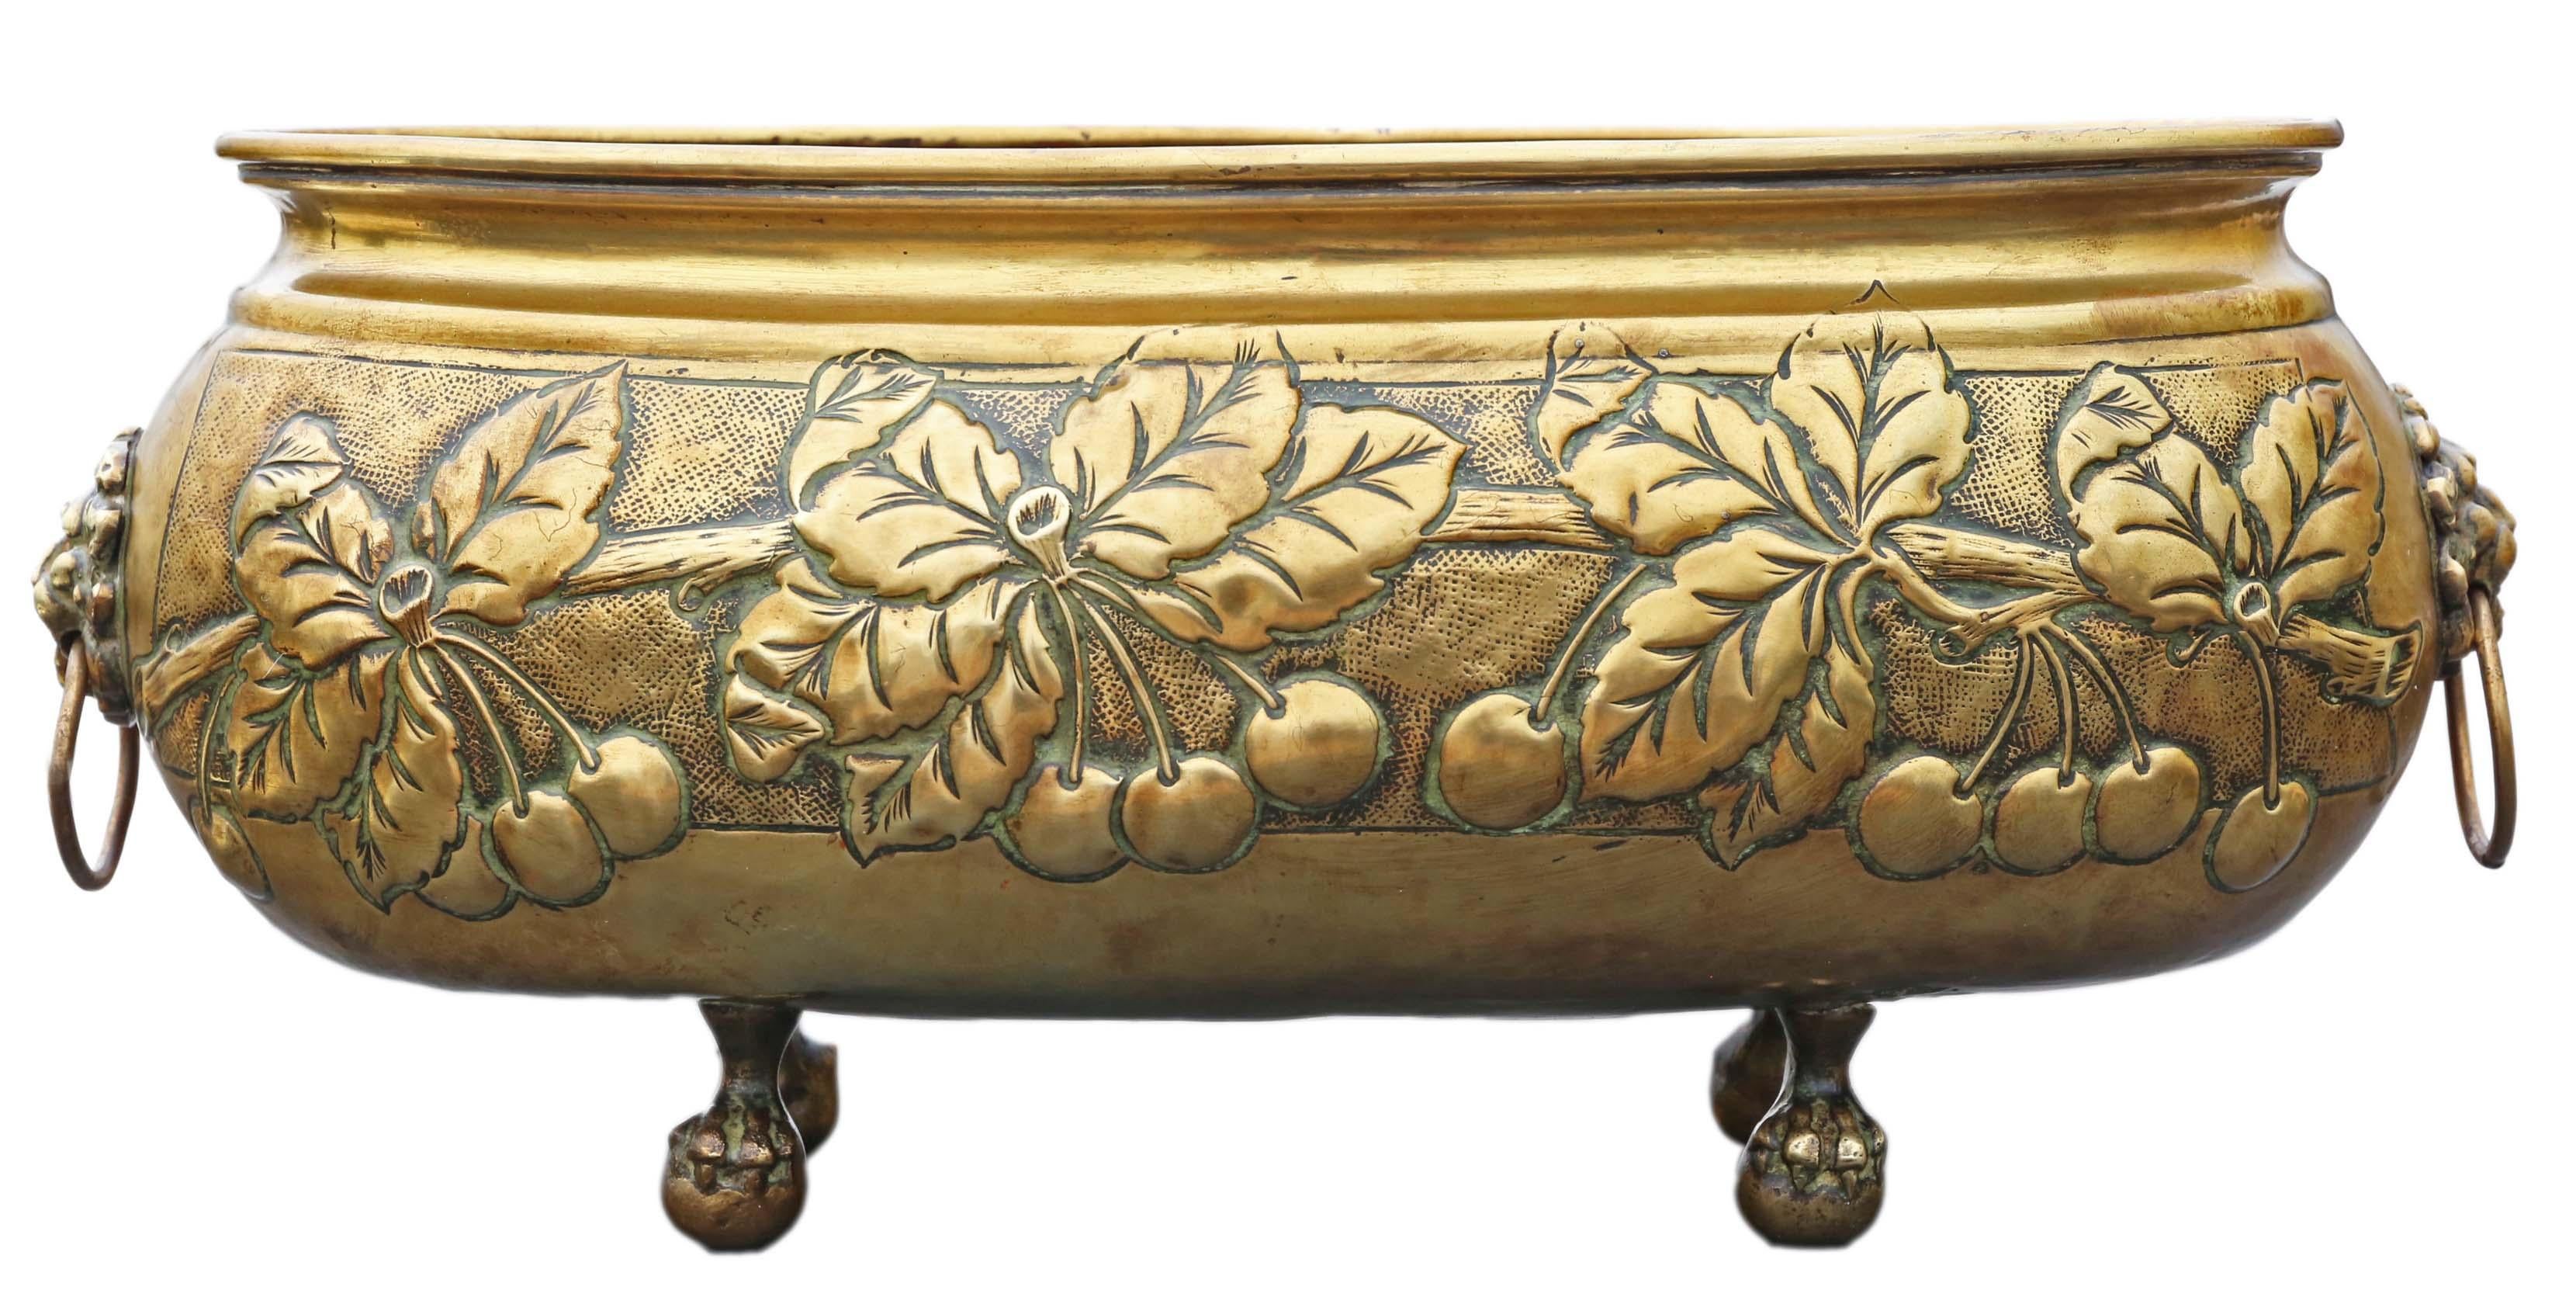 Antique Dutch large quality brass bowl planter jardinière 18th Century C1790.

Would look amazing in the right location and make a fabulous centre piece. Great colour and patina. A very rare find with great lion mask handles and paw